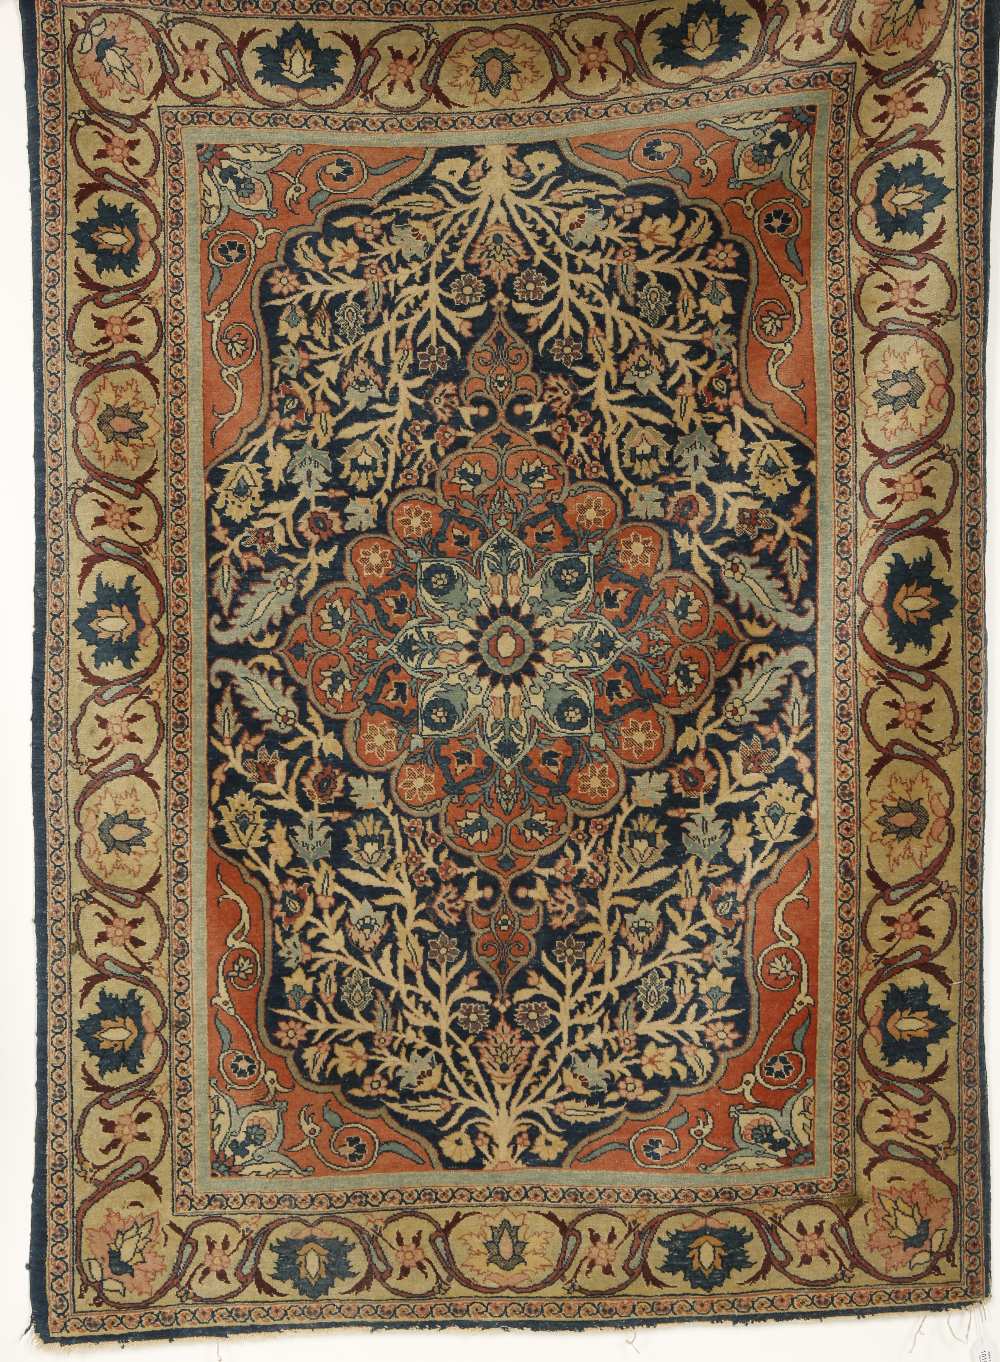 A PERSIAN RUG worked with a central scrolling foliate medallion with stylised flowerheads and